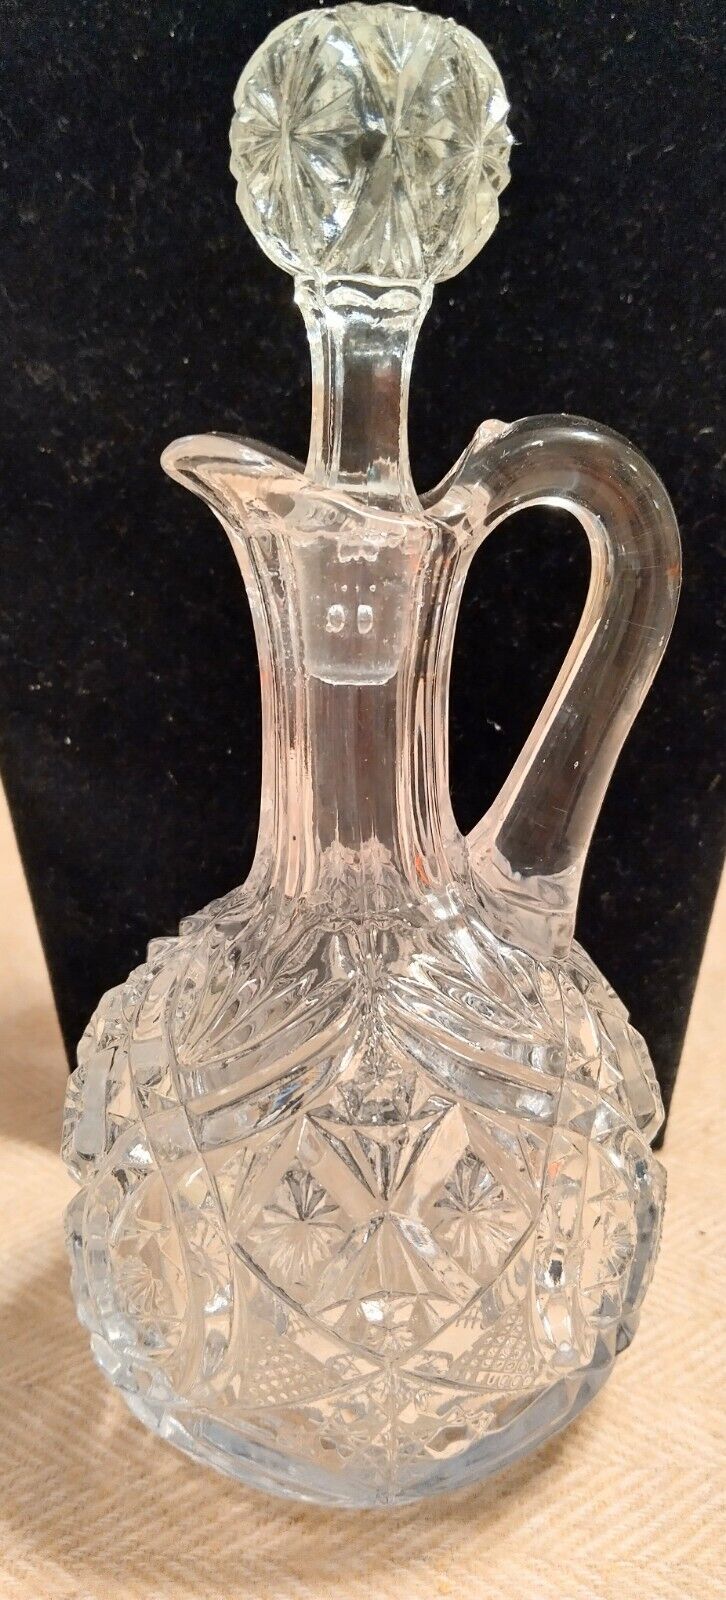 Vintage Hand Cut Glass Decanter With Stopper 7 In H.  Bar Ware, Oil And Vinegar